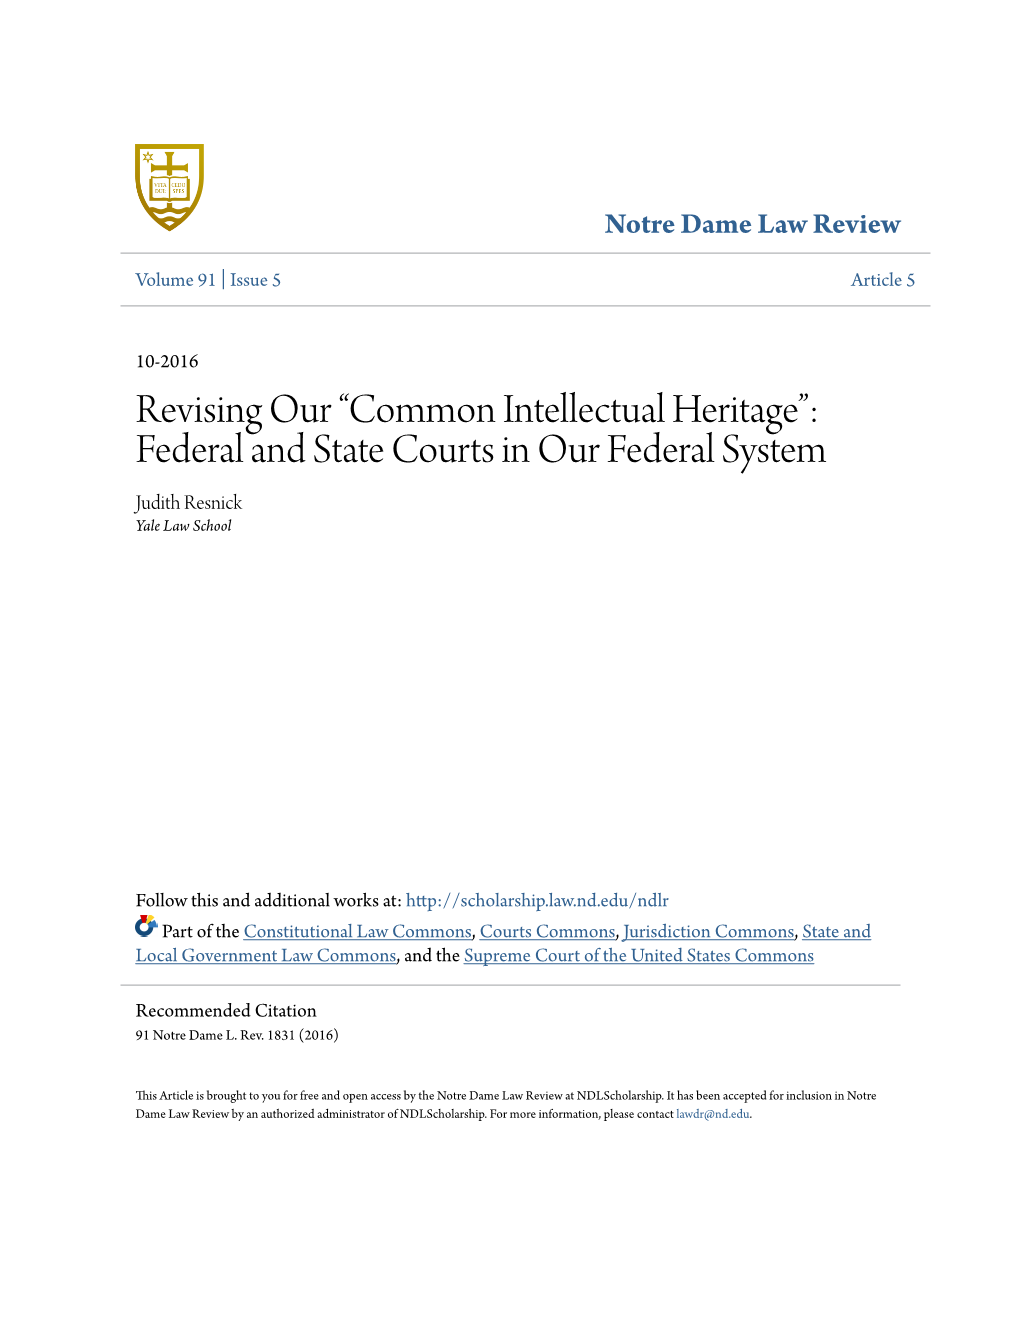 Revising Our “Common Intellectual Heritage”: Federal and State Courts in Our Federal System Judith Resnick Yale Law School